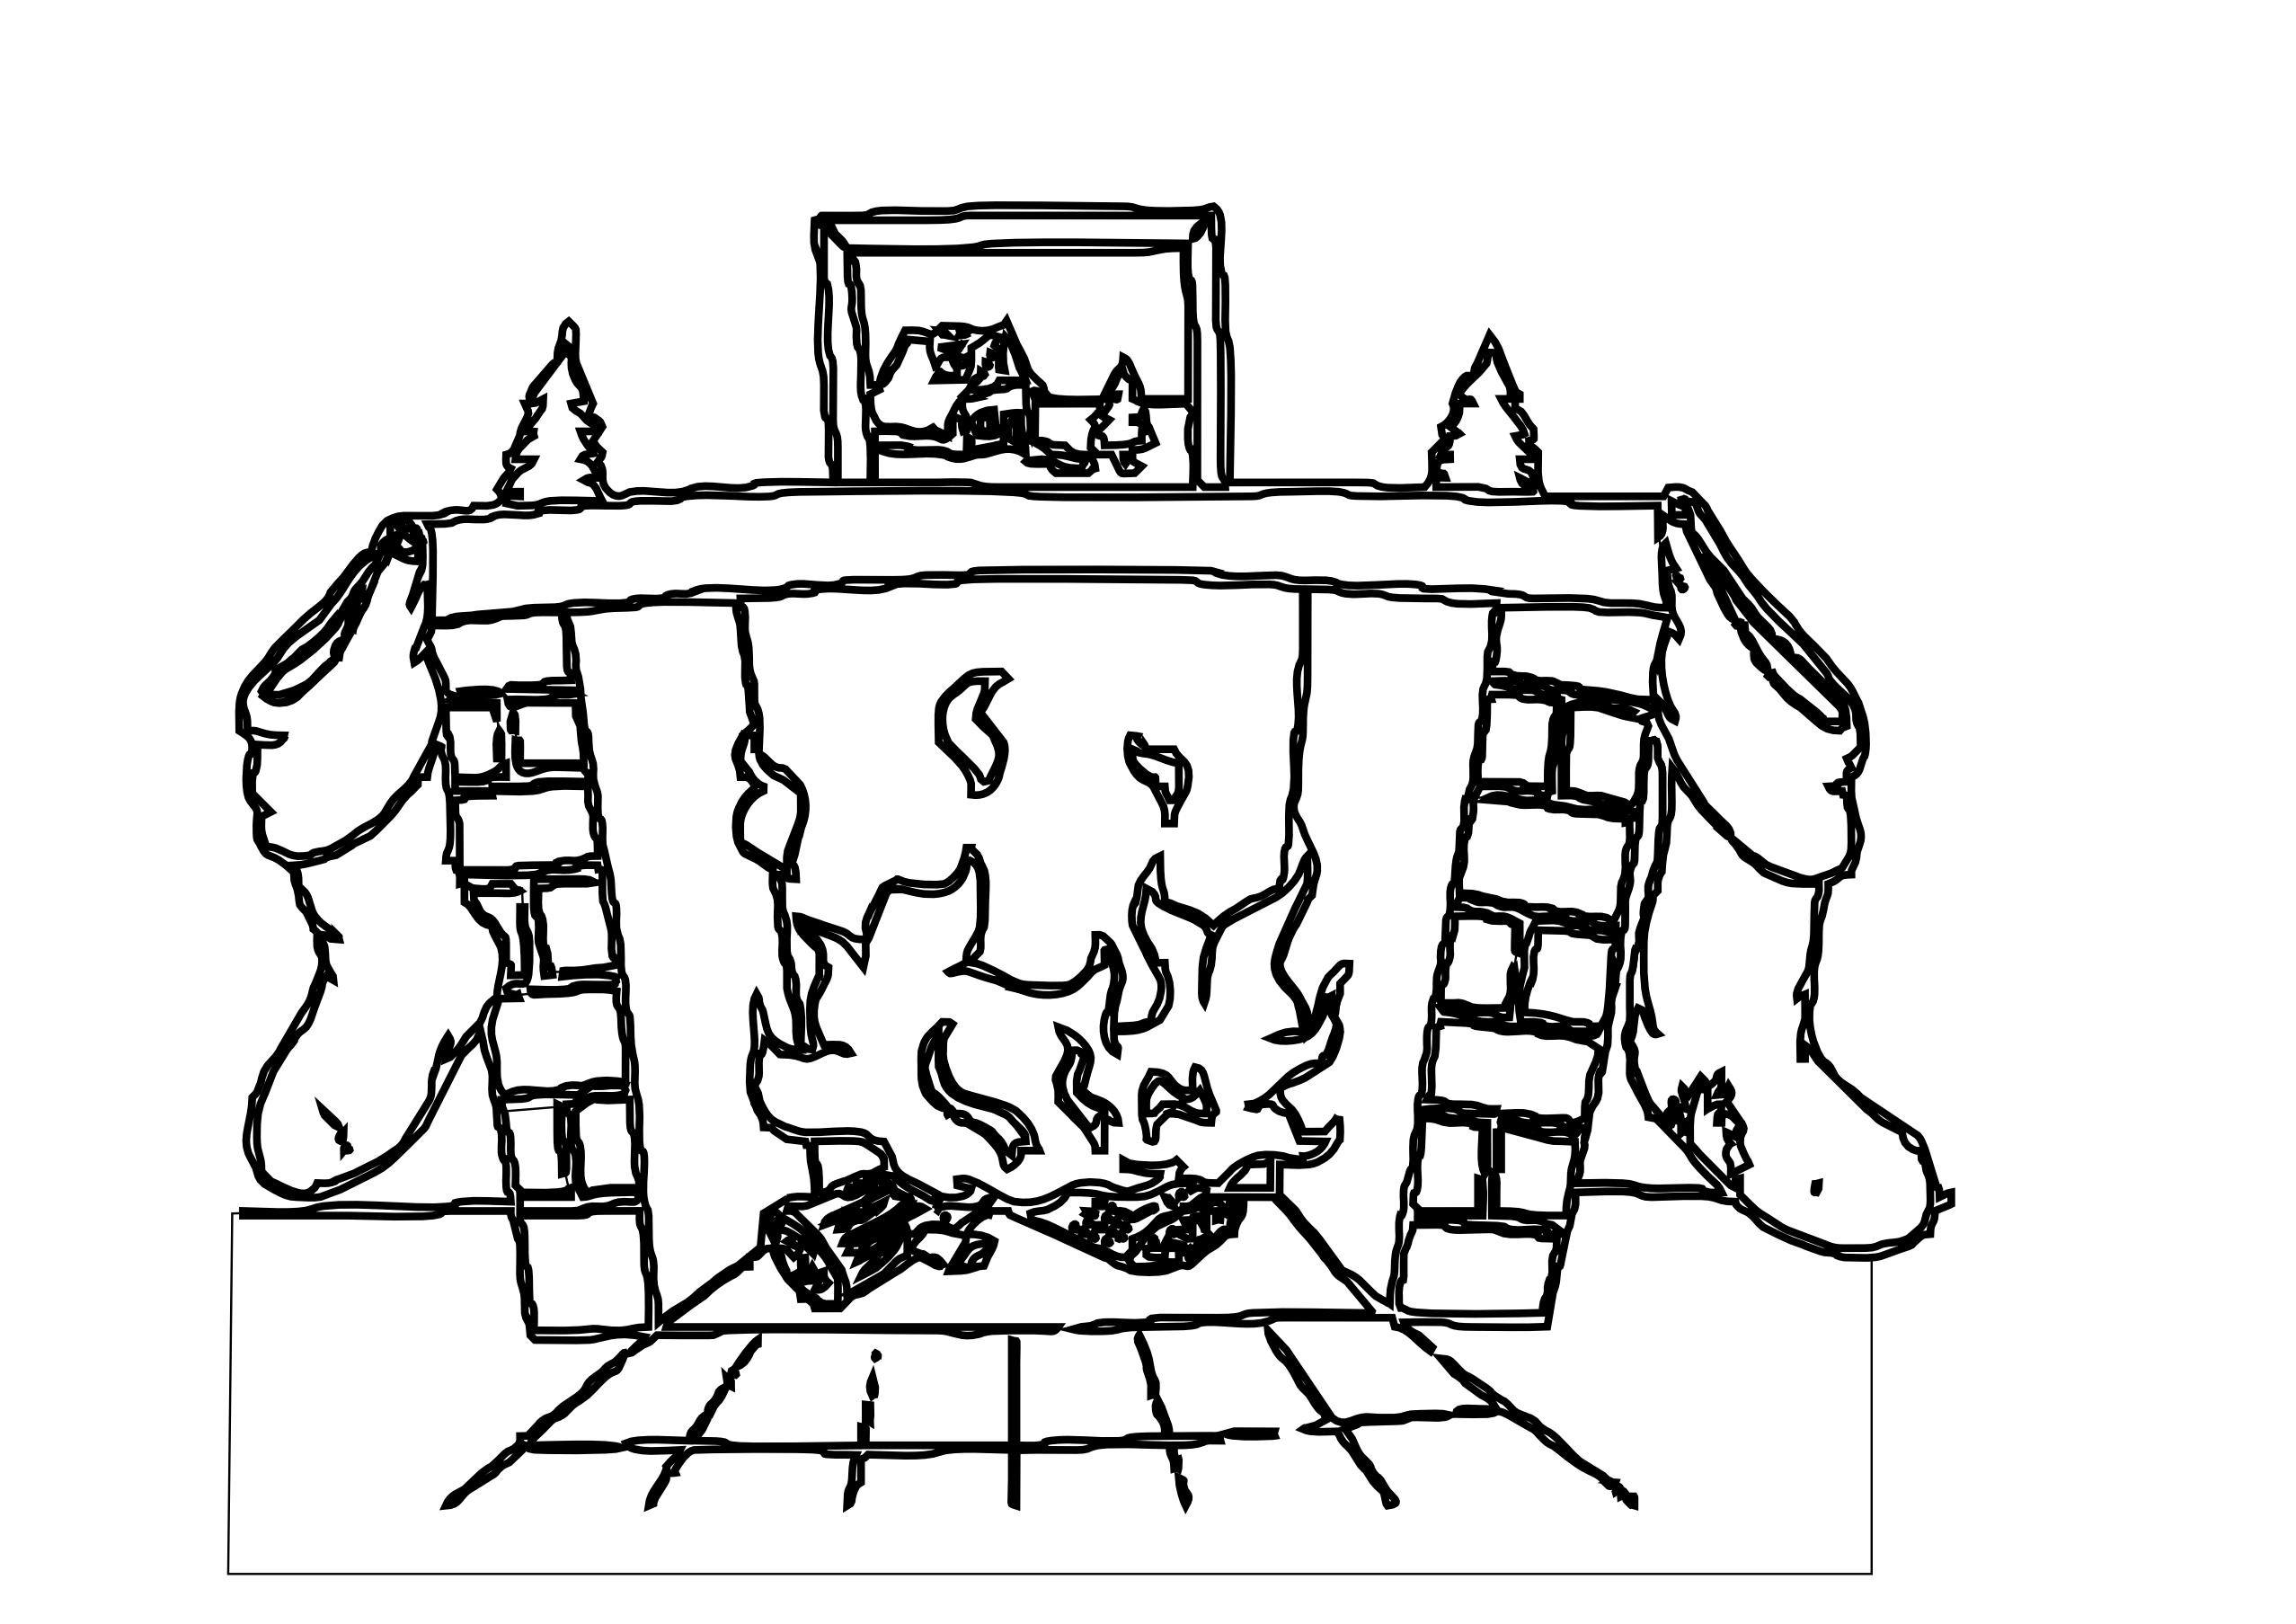 Fireplace Clipart Black And White   Clipart Panda   Free Clipart